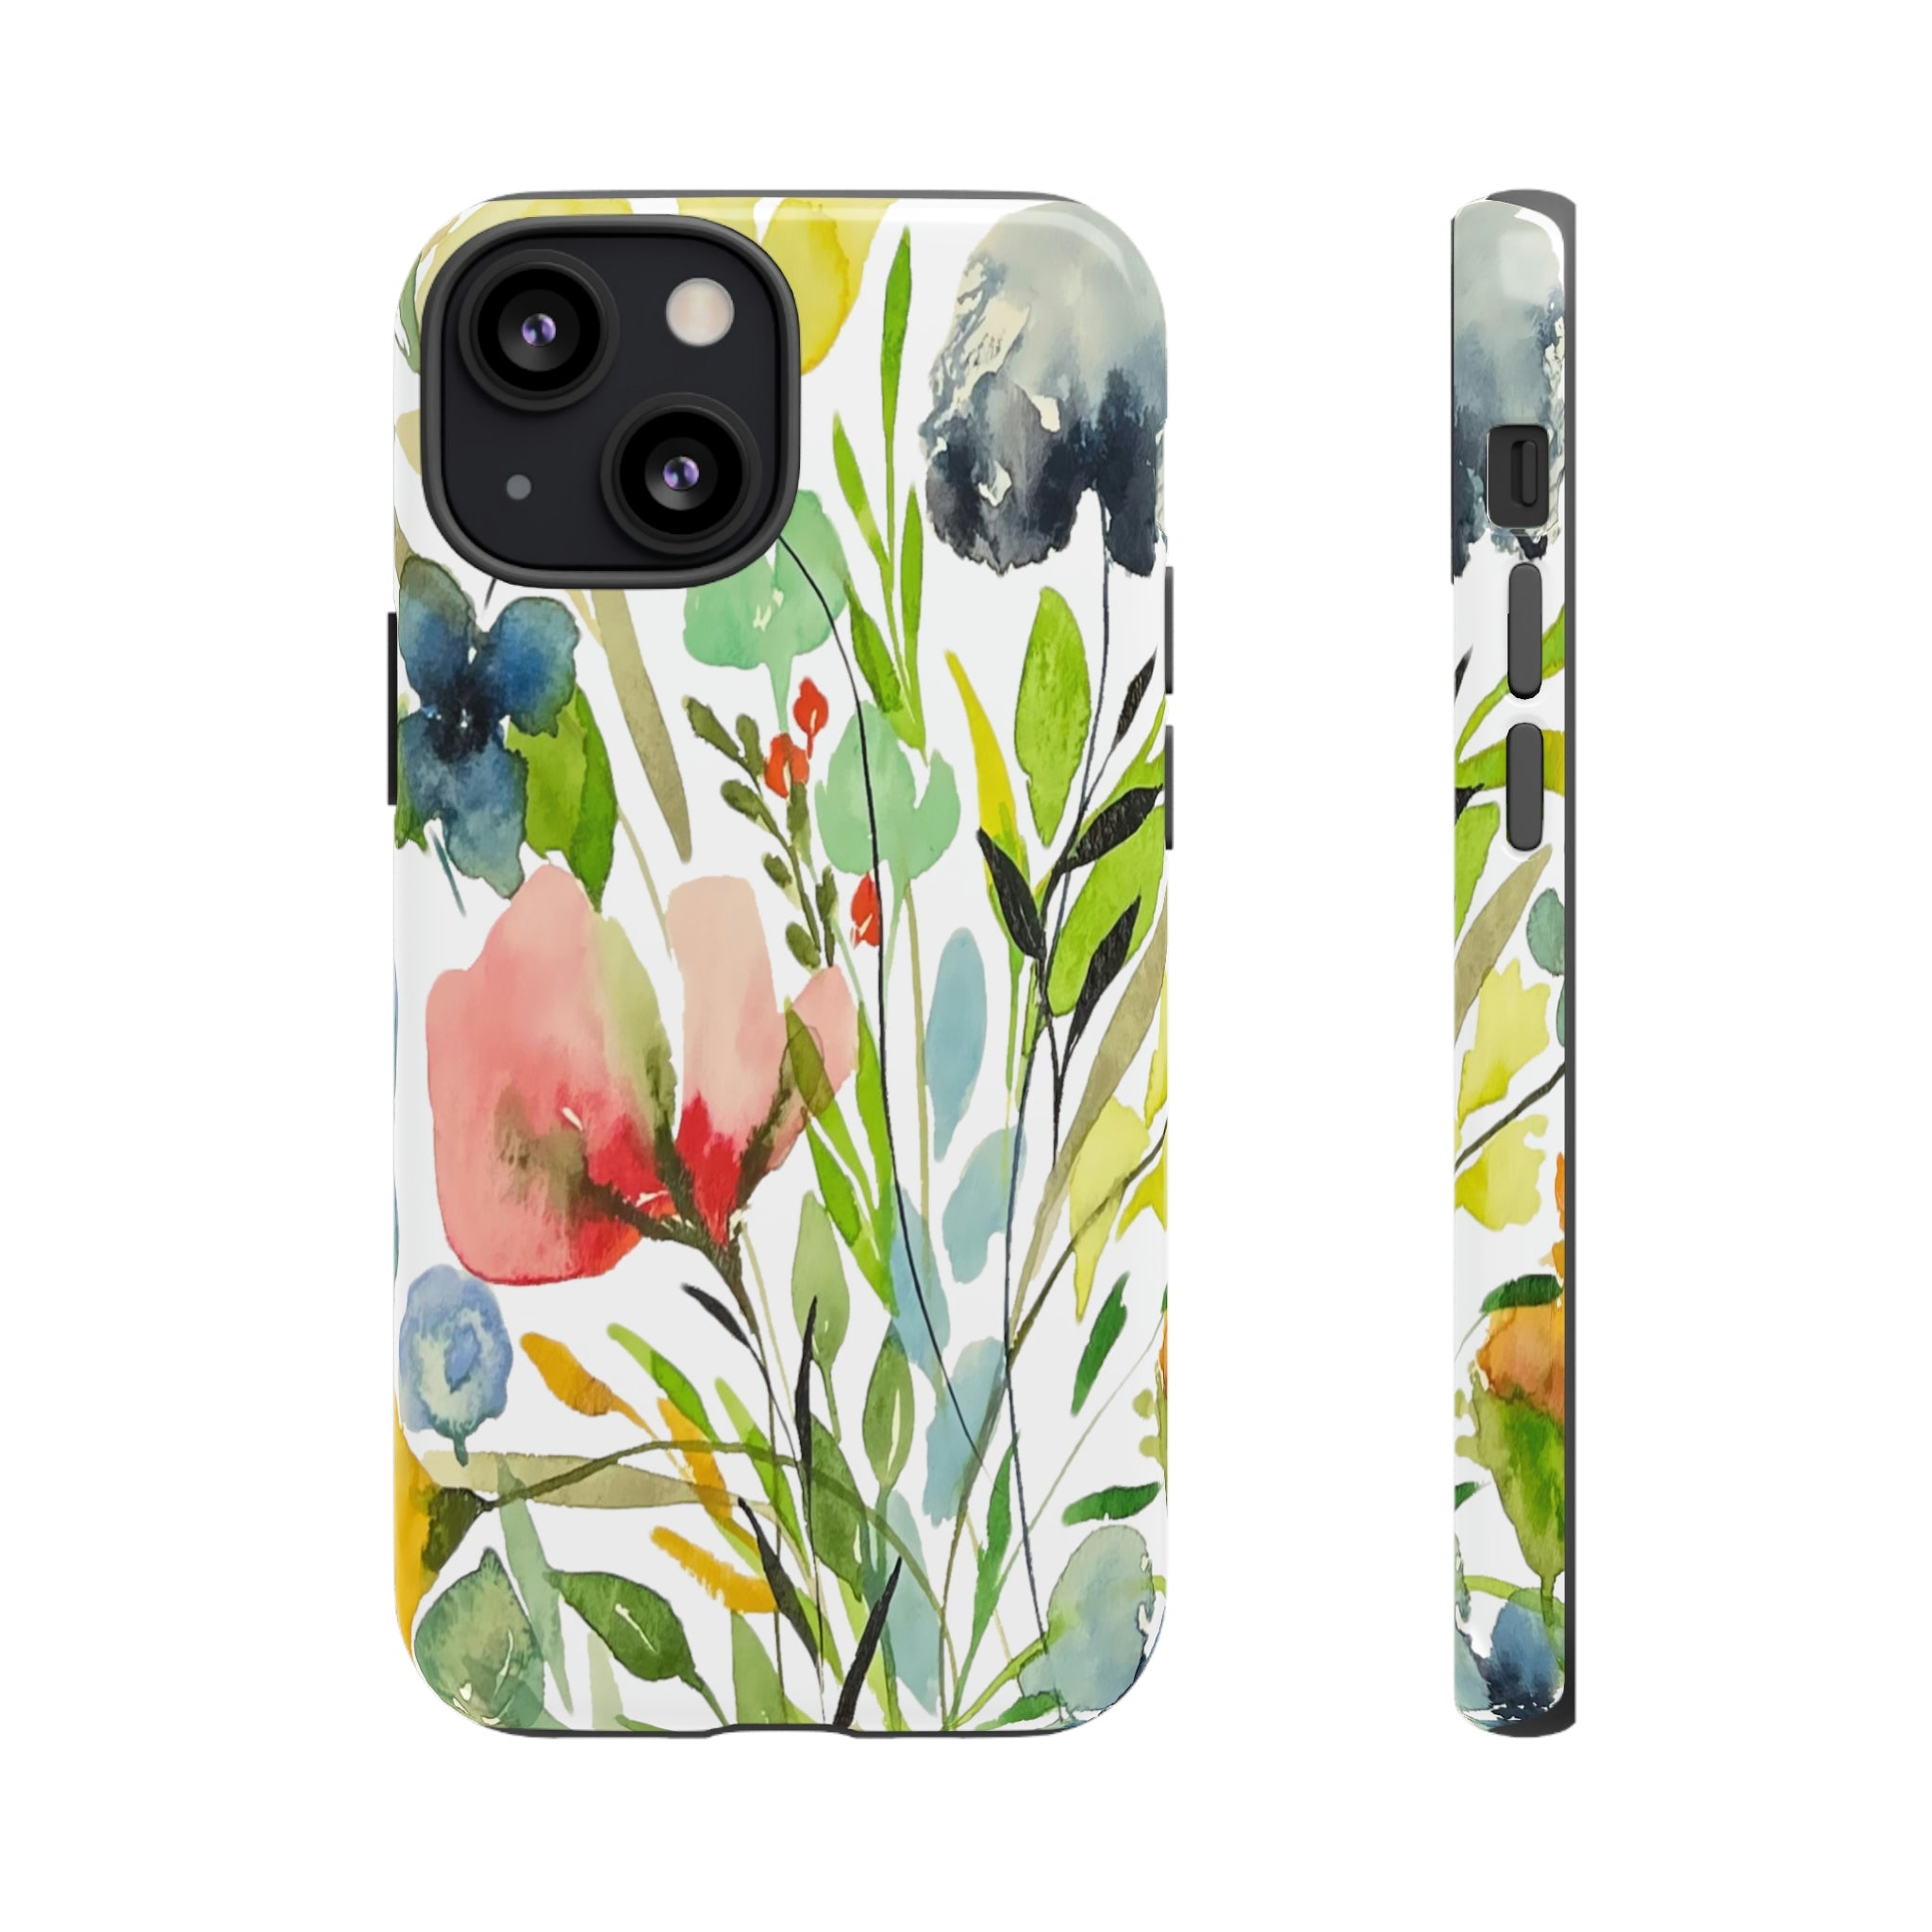 Flowers #3 Botanical Print on Cell Phone Cases | Apple iPhone, Samsung Galaxy, Google Pixel